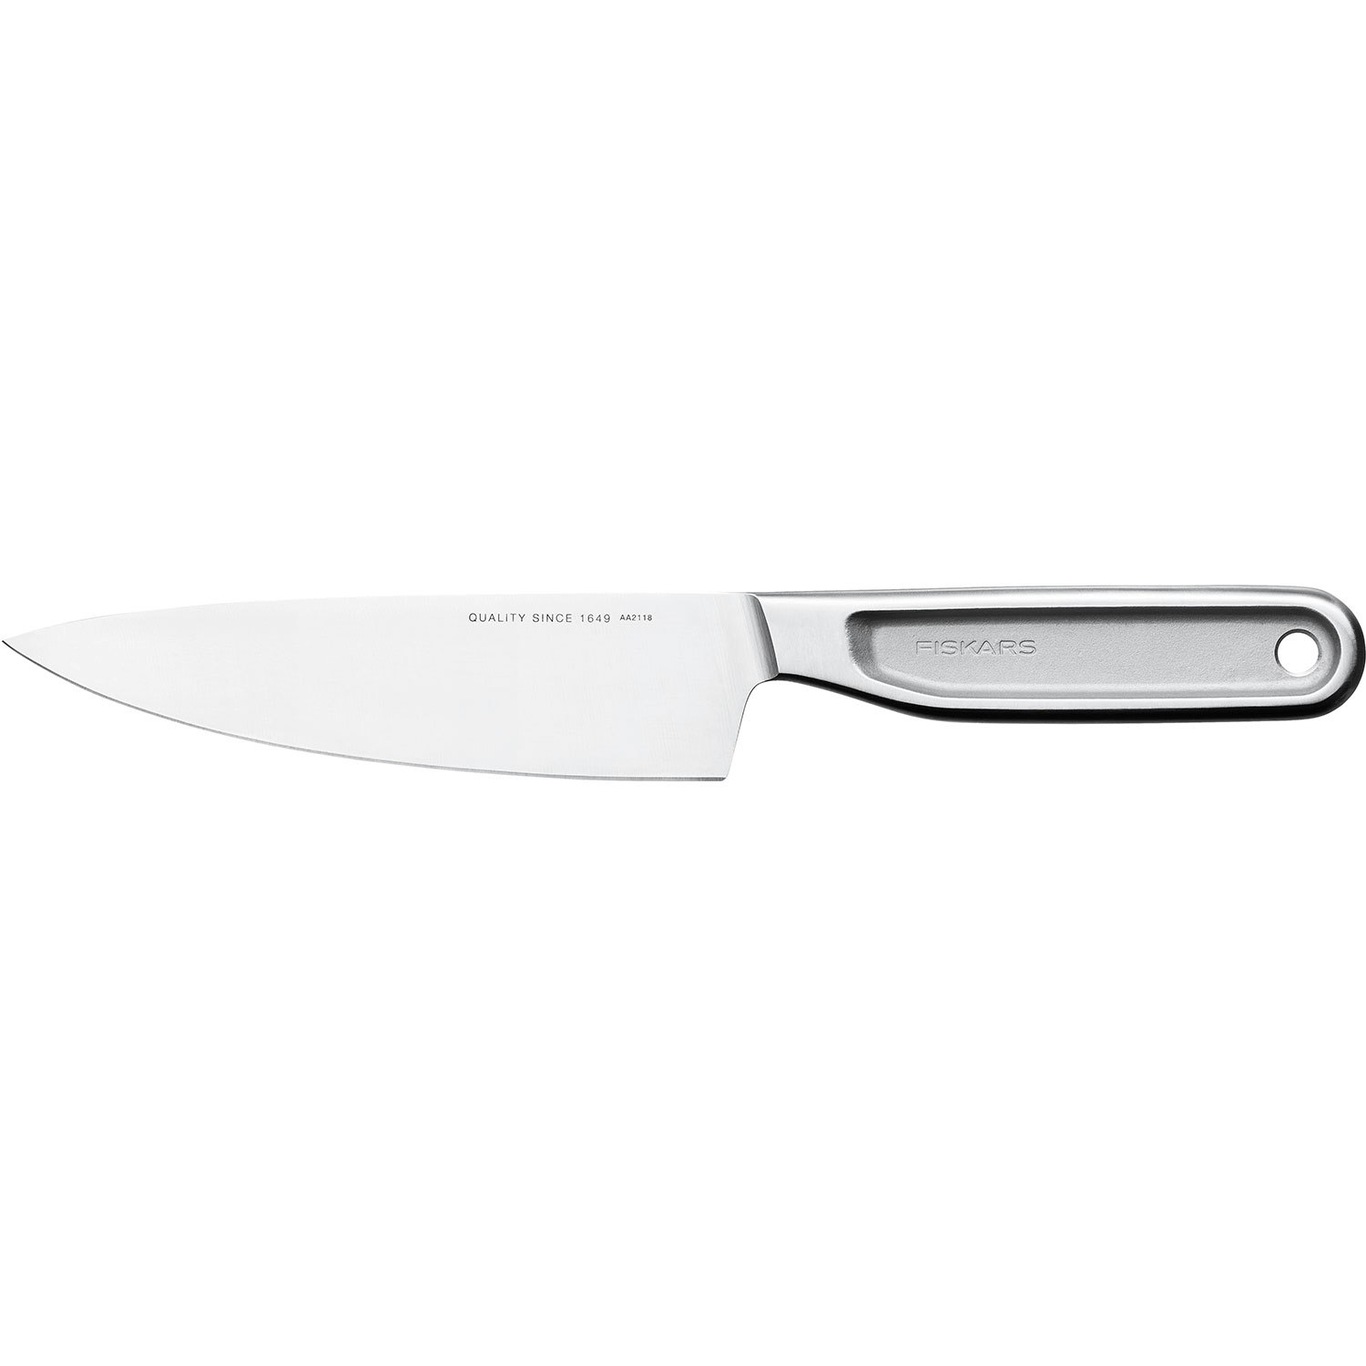 12 Chefknife Royalty-Free Images, Stock Photos & Pictures